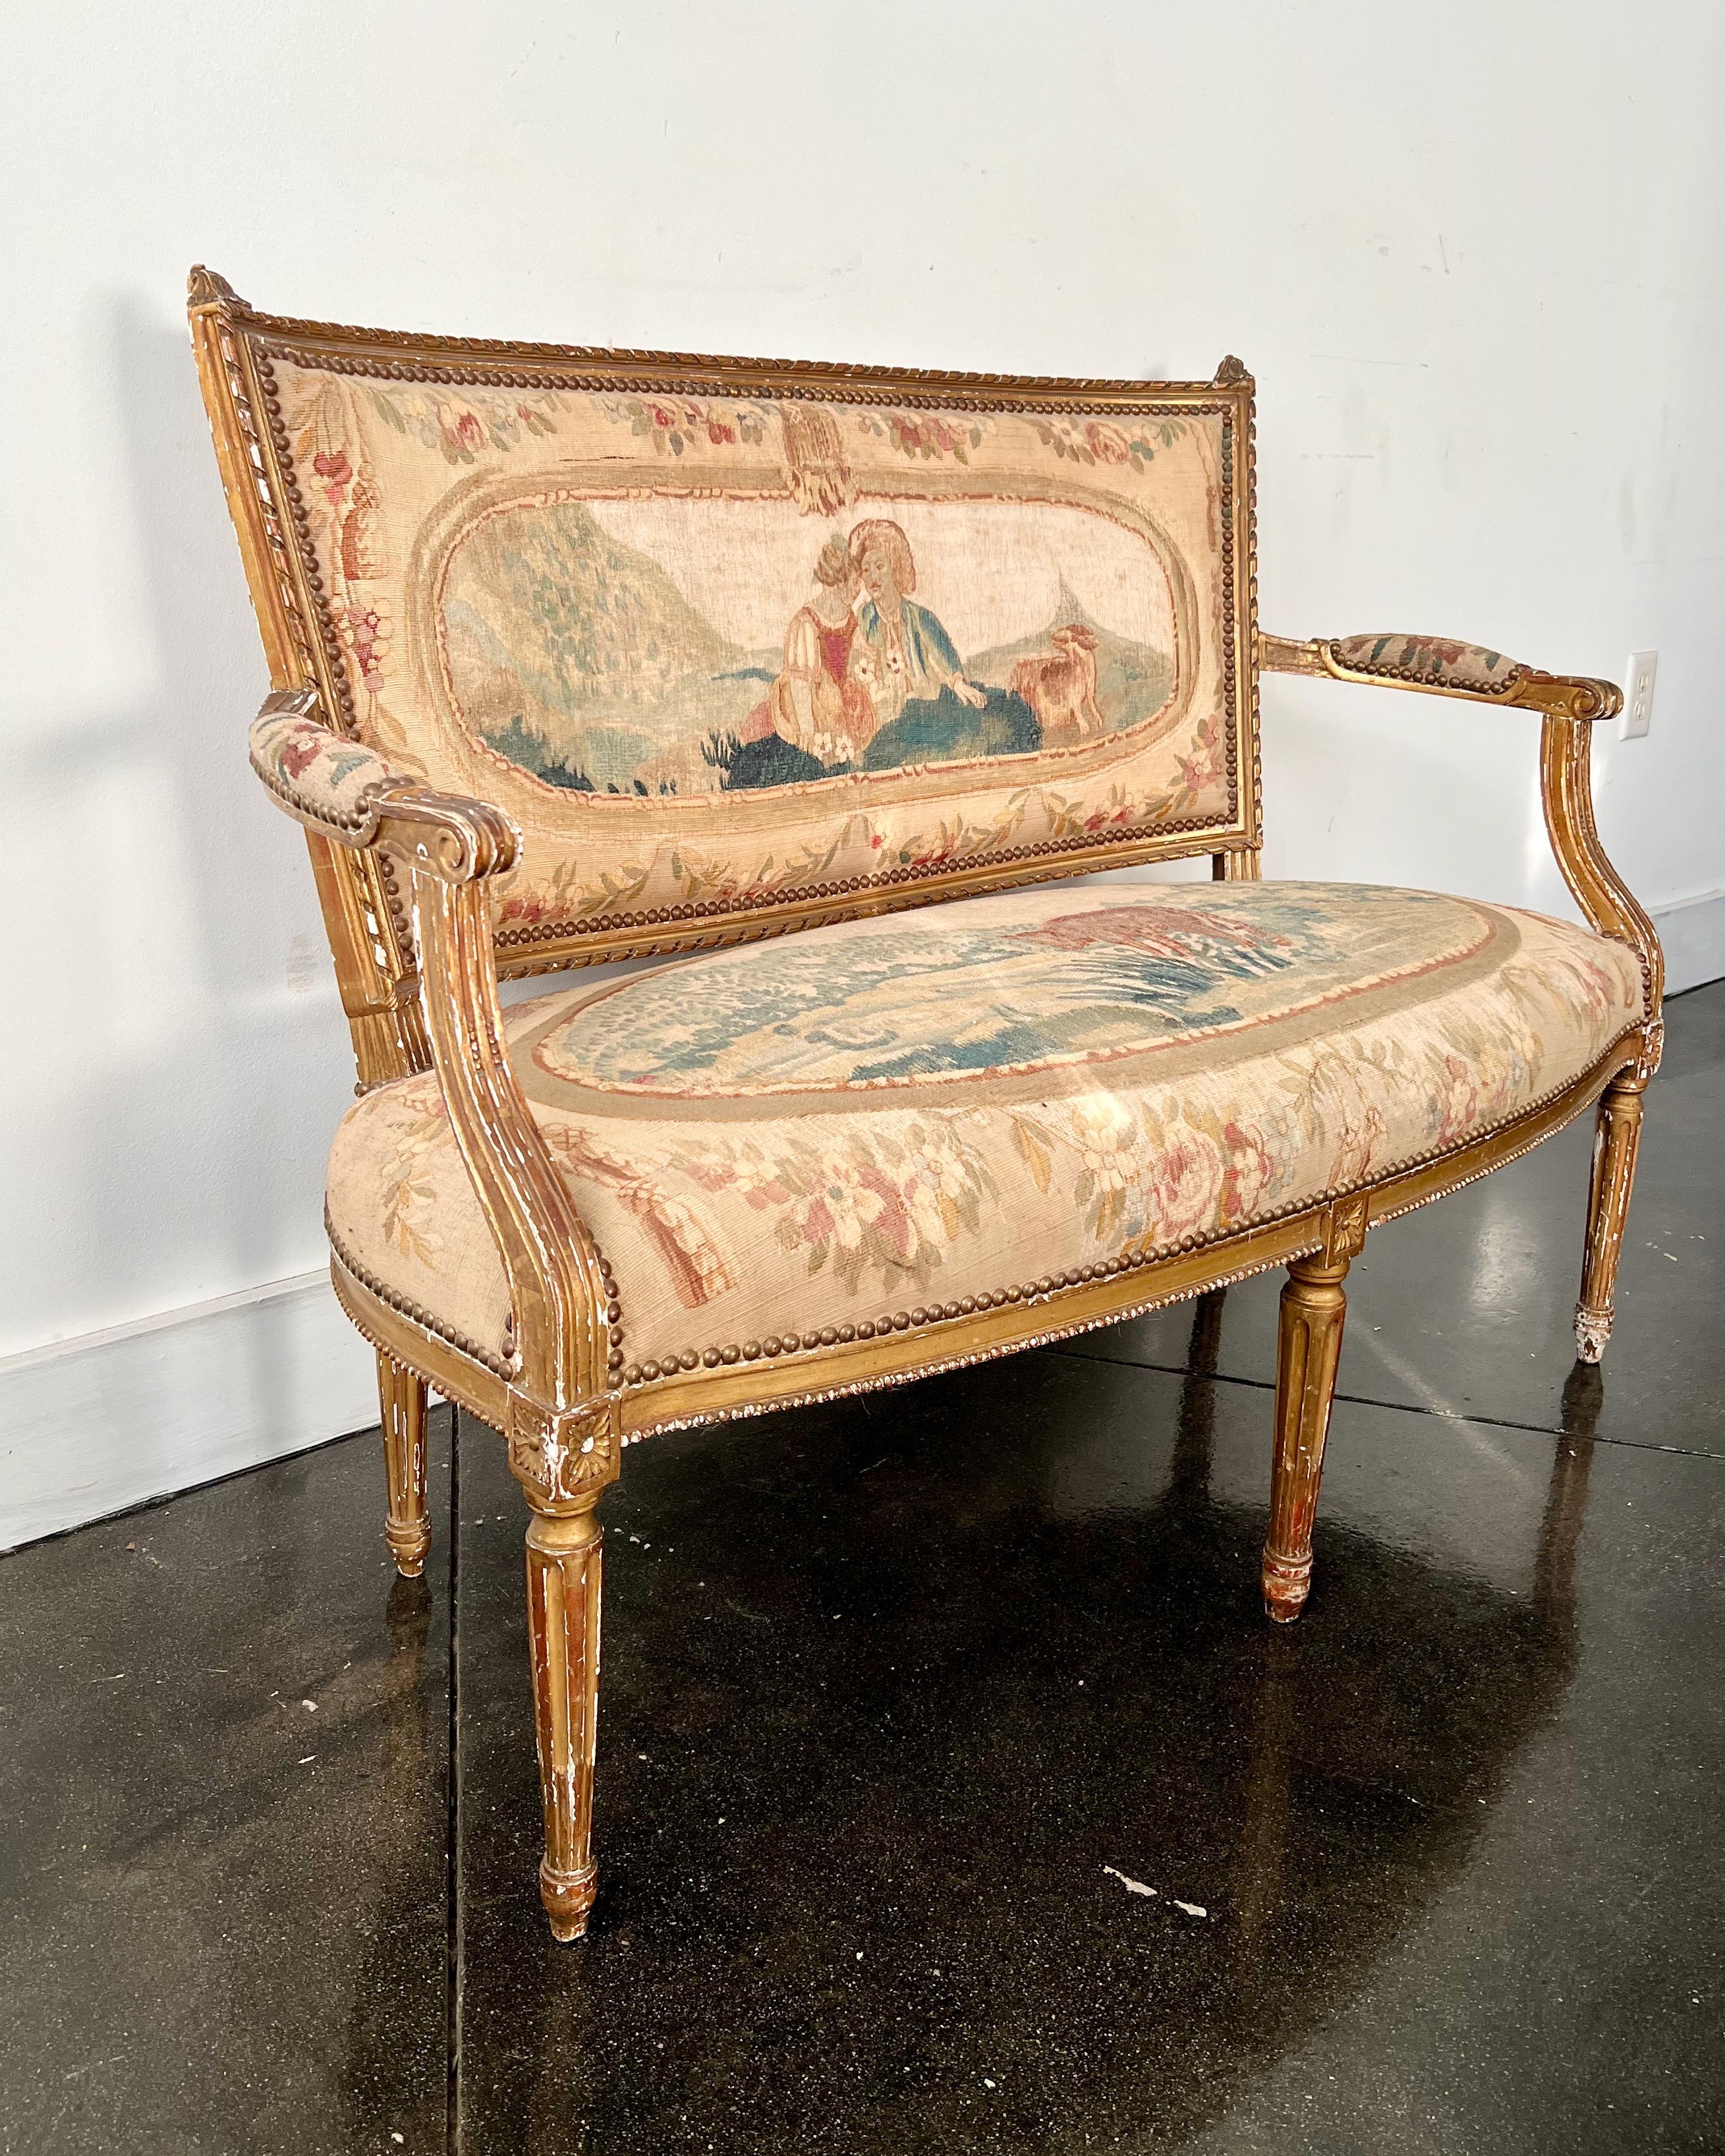 Louis XVI 19th century French LXVI Style Gilt-wood Settee in Aubusson Tapestry Upholstery  For Sale